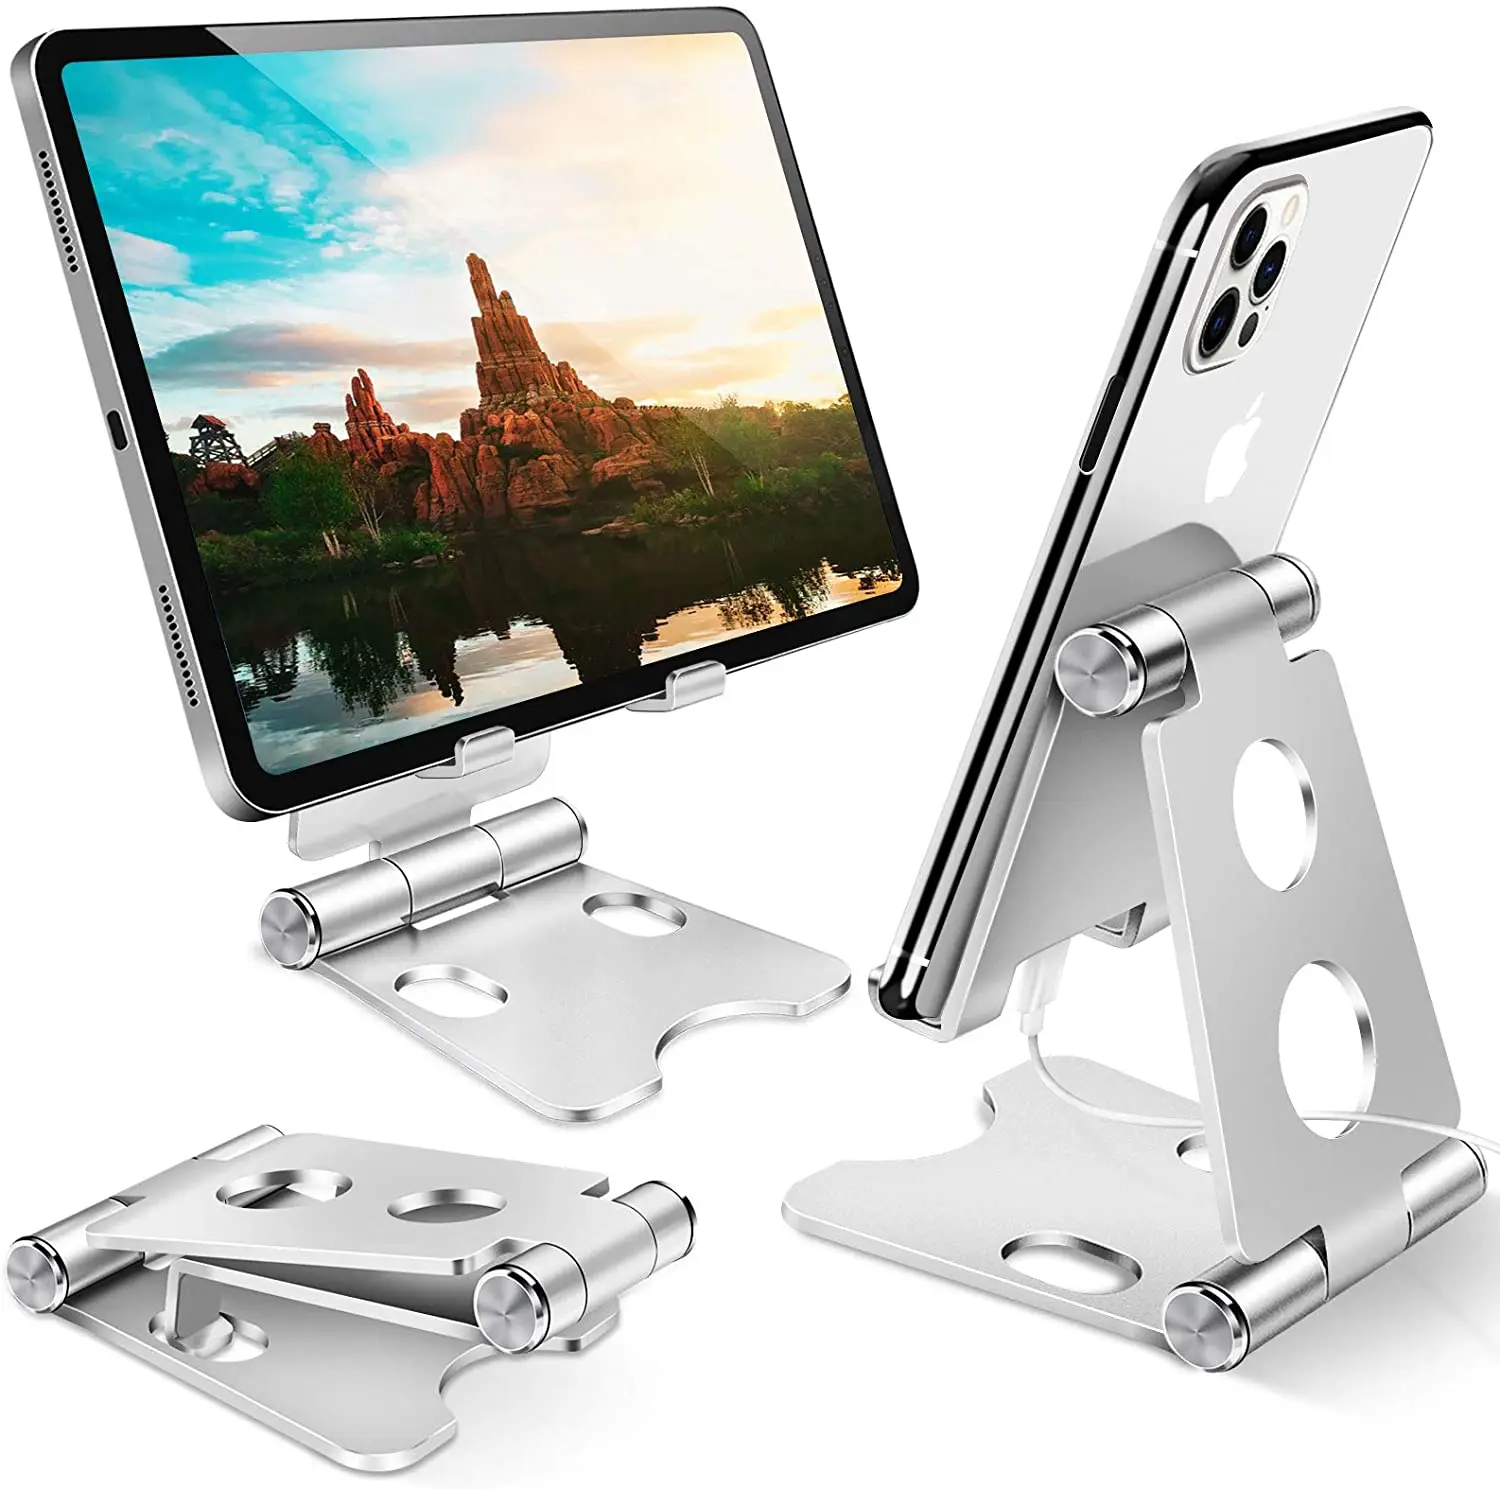 

Cell Phone Stand, Fully Foldable, Adjustable Desktop Phone Holder Cradle Dock Compatible with Phone 11 Pro Xs Xs Max Xr X 8,